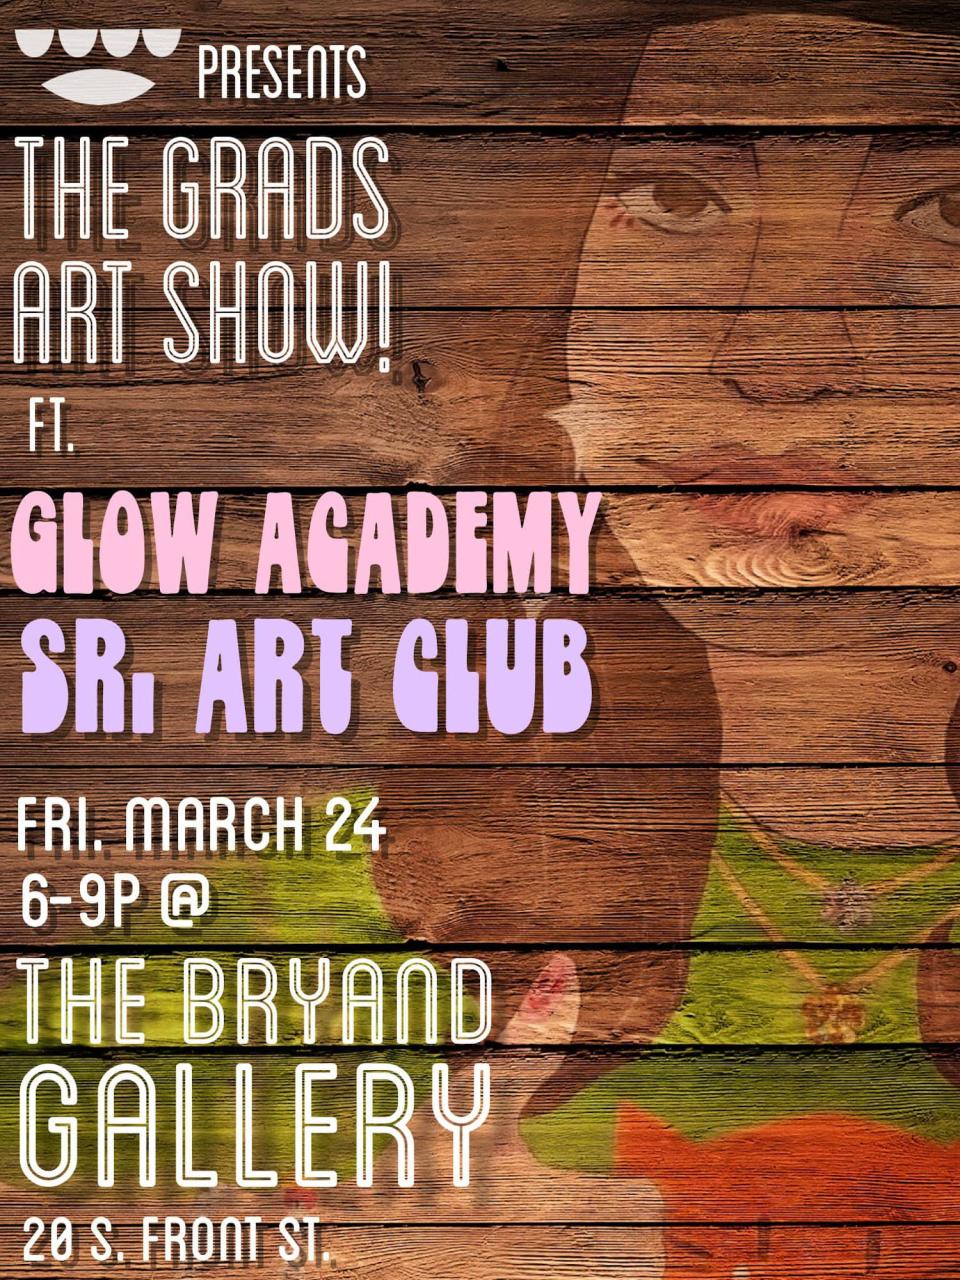 Opening for "The Grads Art Show" at the Bryand Gallery is 6-9 p.m. March 24.